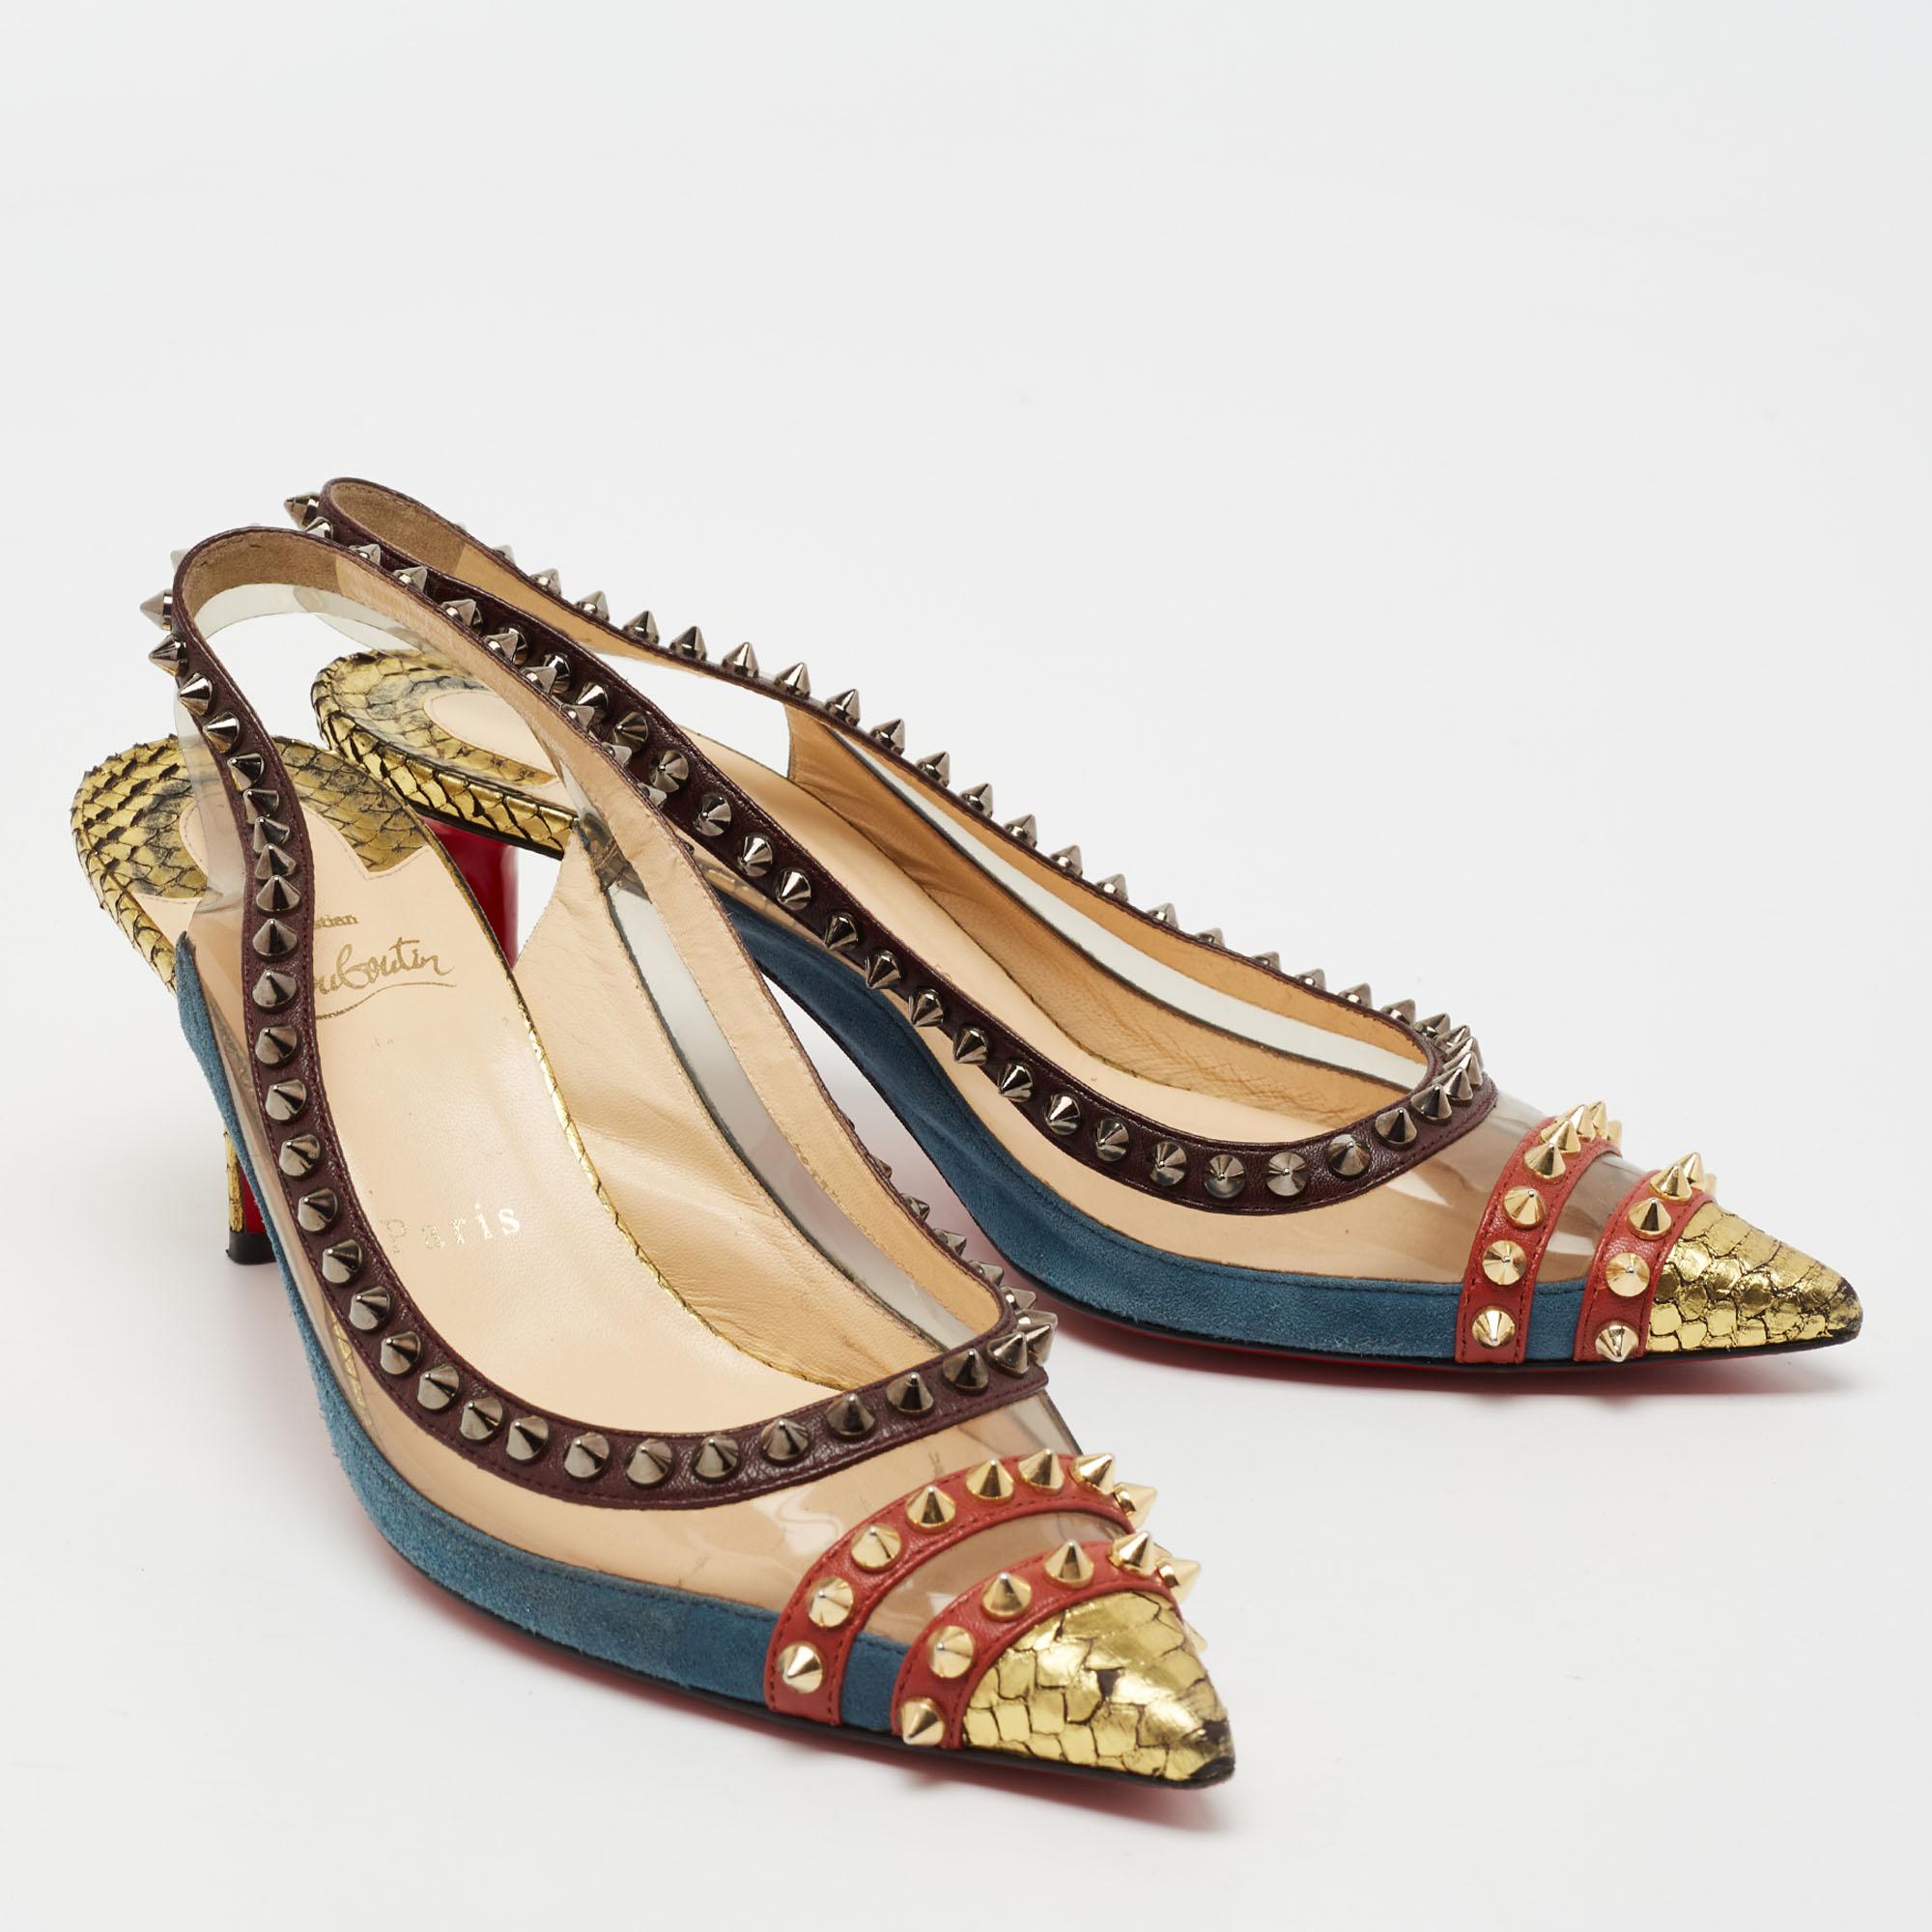 Slip into these statement Christian Louboutin pumps and add grace to your strides. Crafted from suede, these multicolored slingbacks are accented with PVC trims for a minimal look. With pointed toes, fabulous spike detailing all around, and